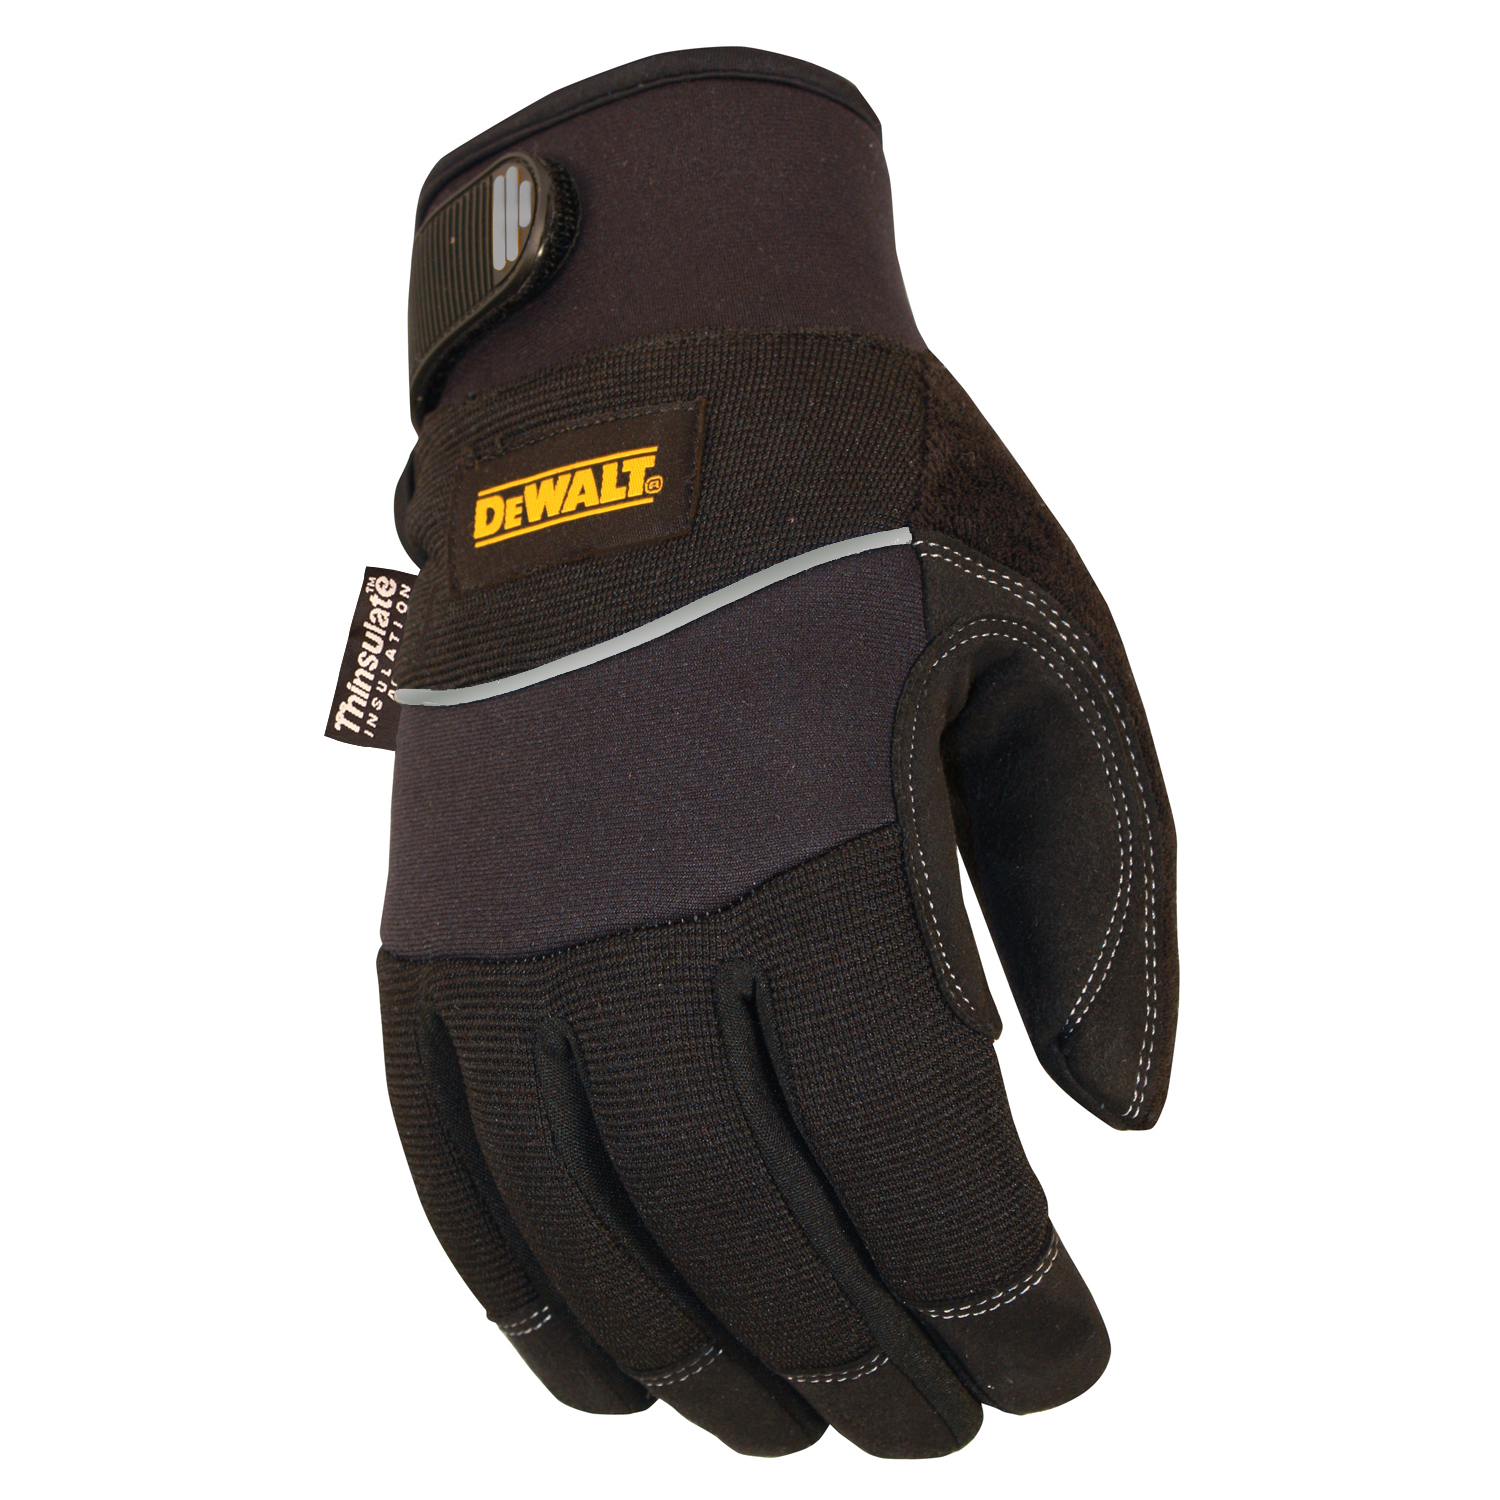 DPG755 Insulated Harsh Condition Work Glove - Size L